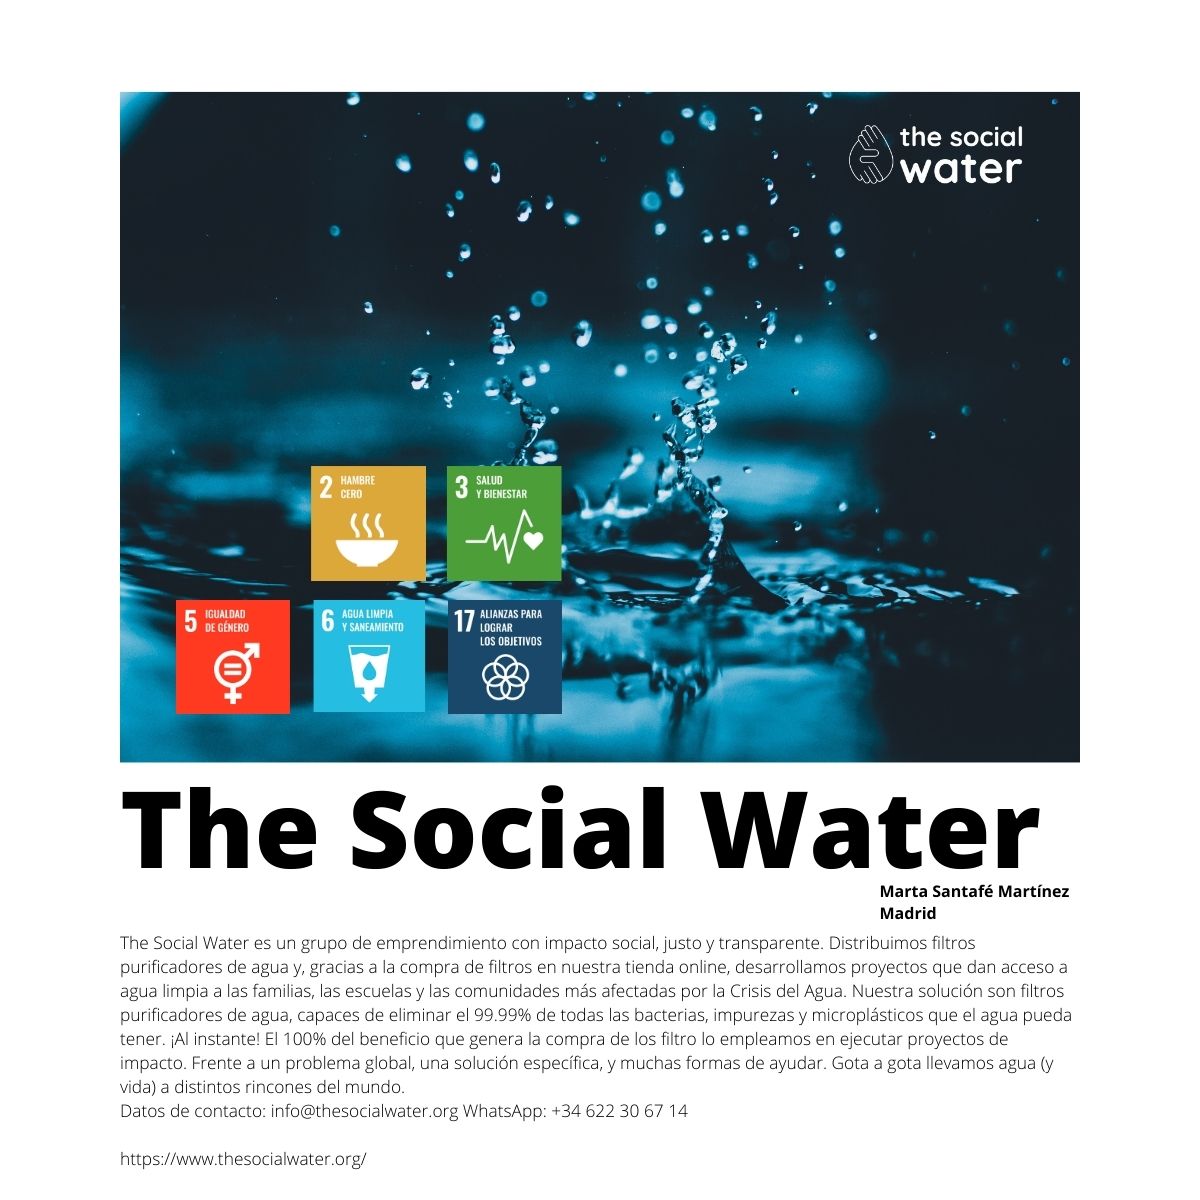 The social water